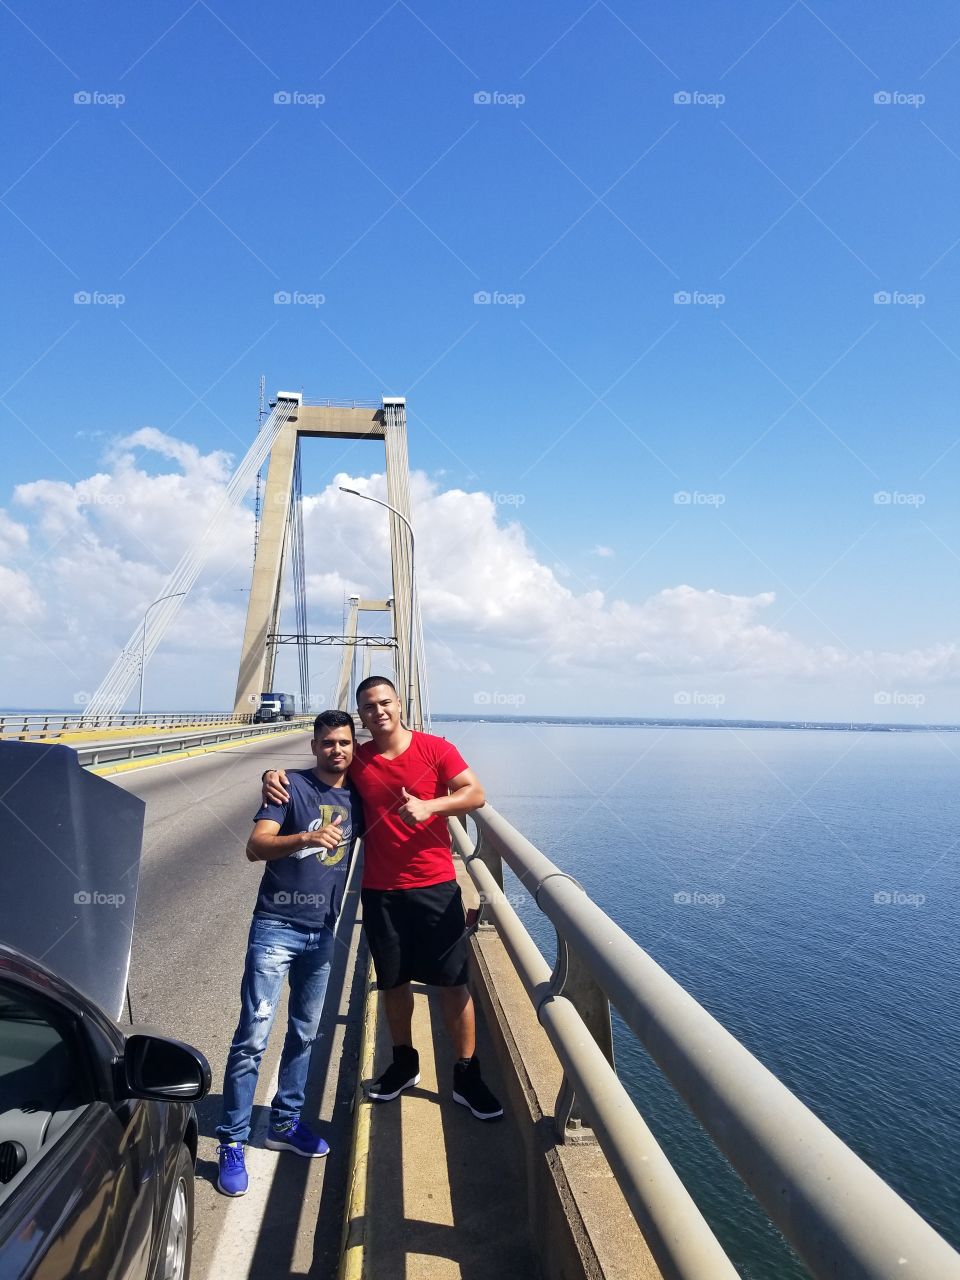 On top of puente maracaibo with my buddy